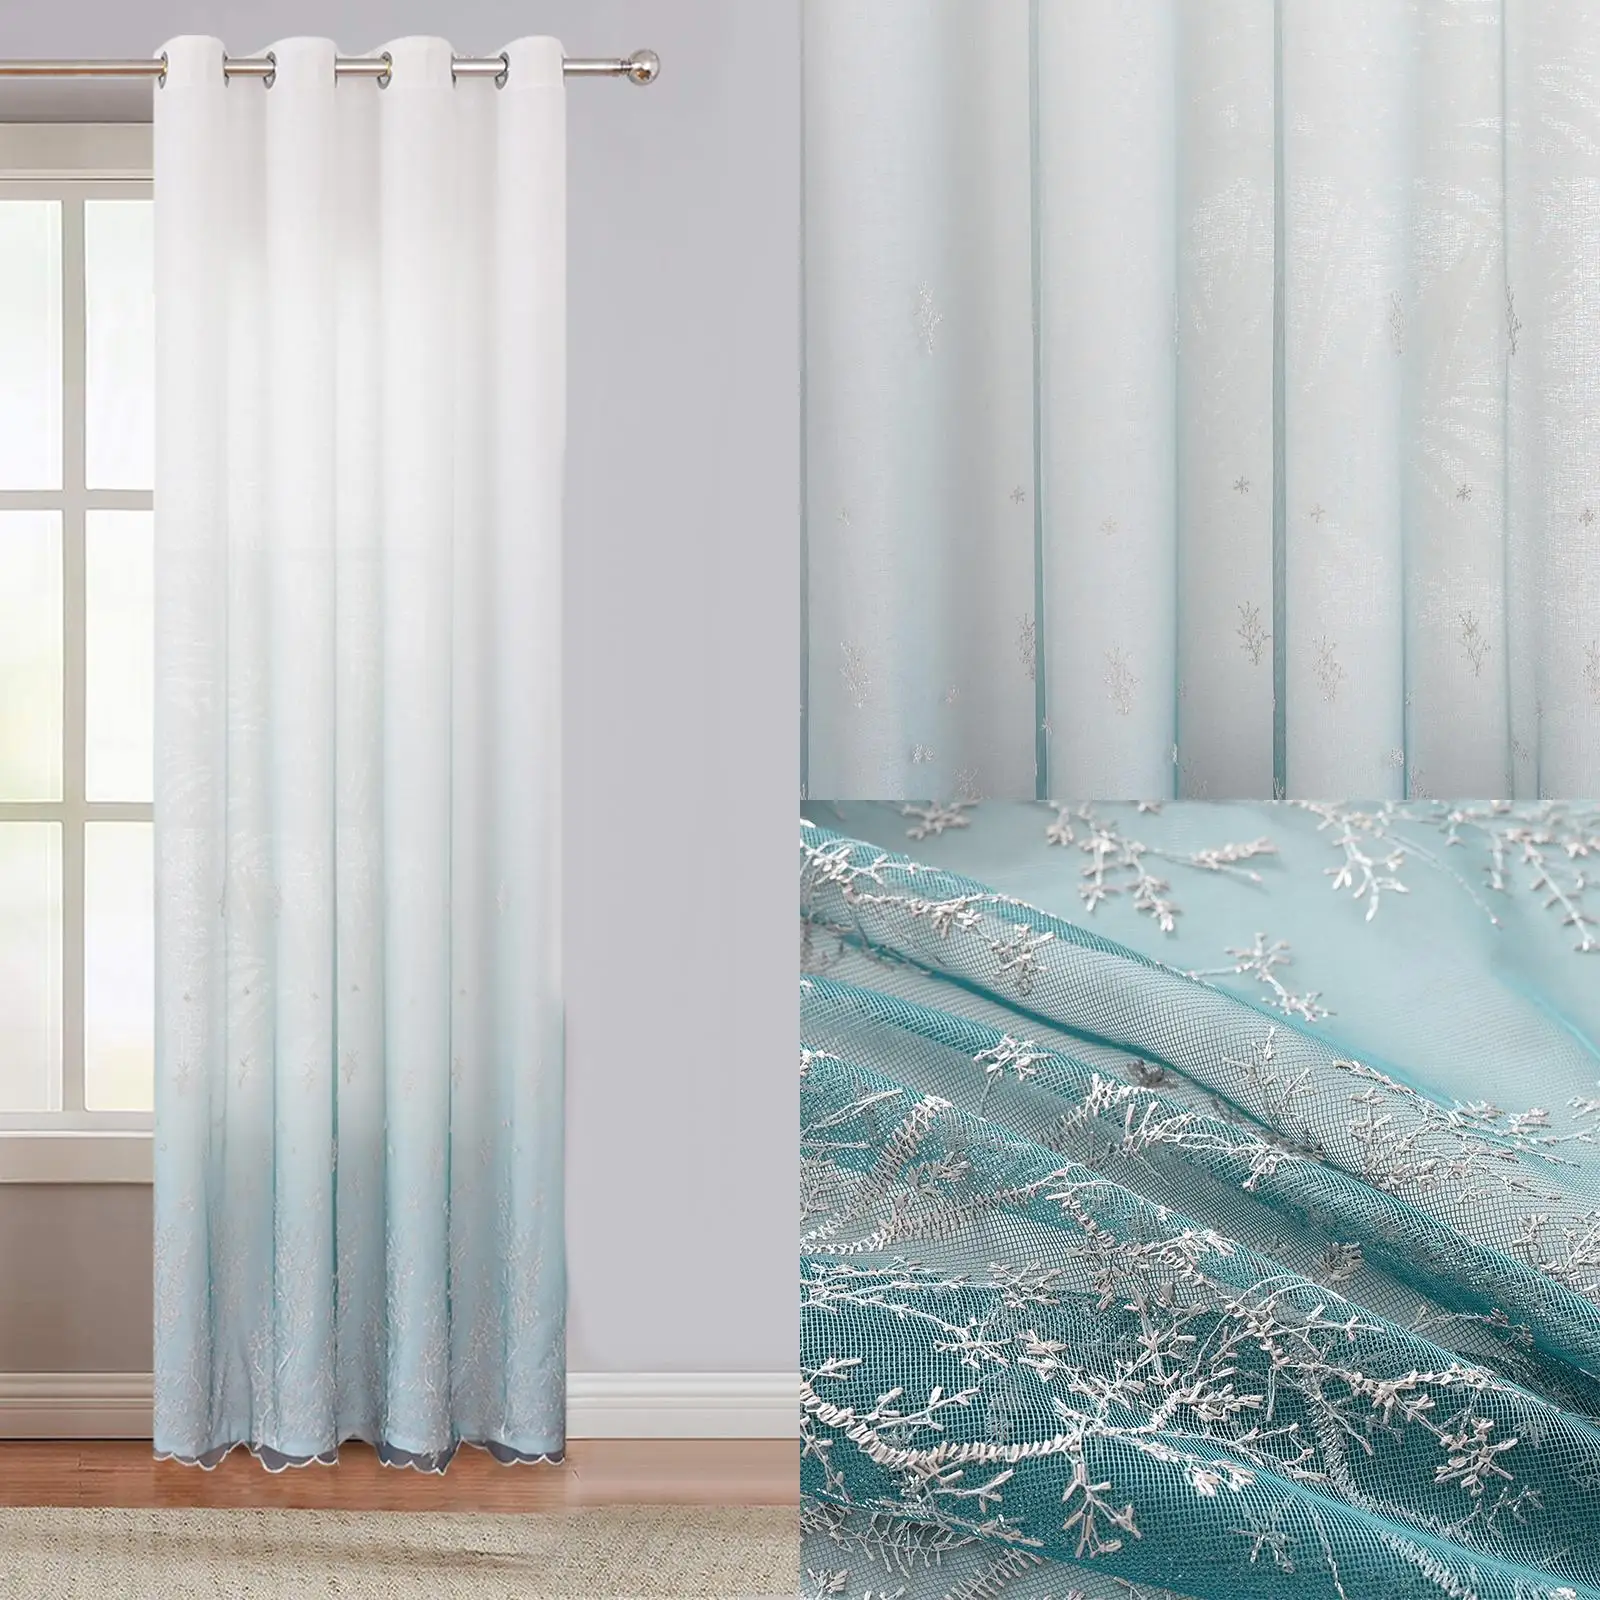 2 Pieces Grommet Curtain Window Treatment Blackout Curtains for Bedroom Home